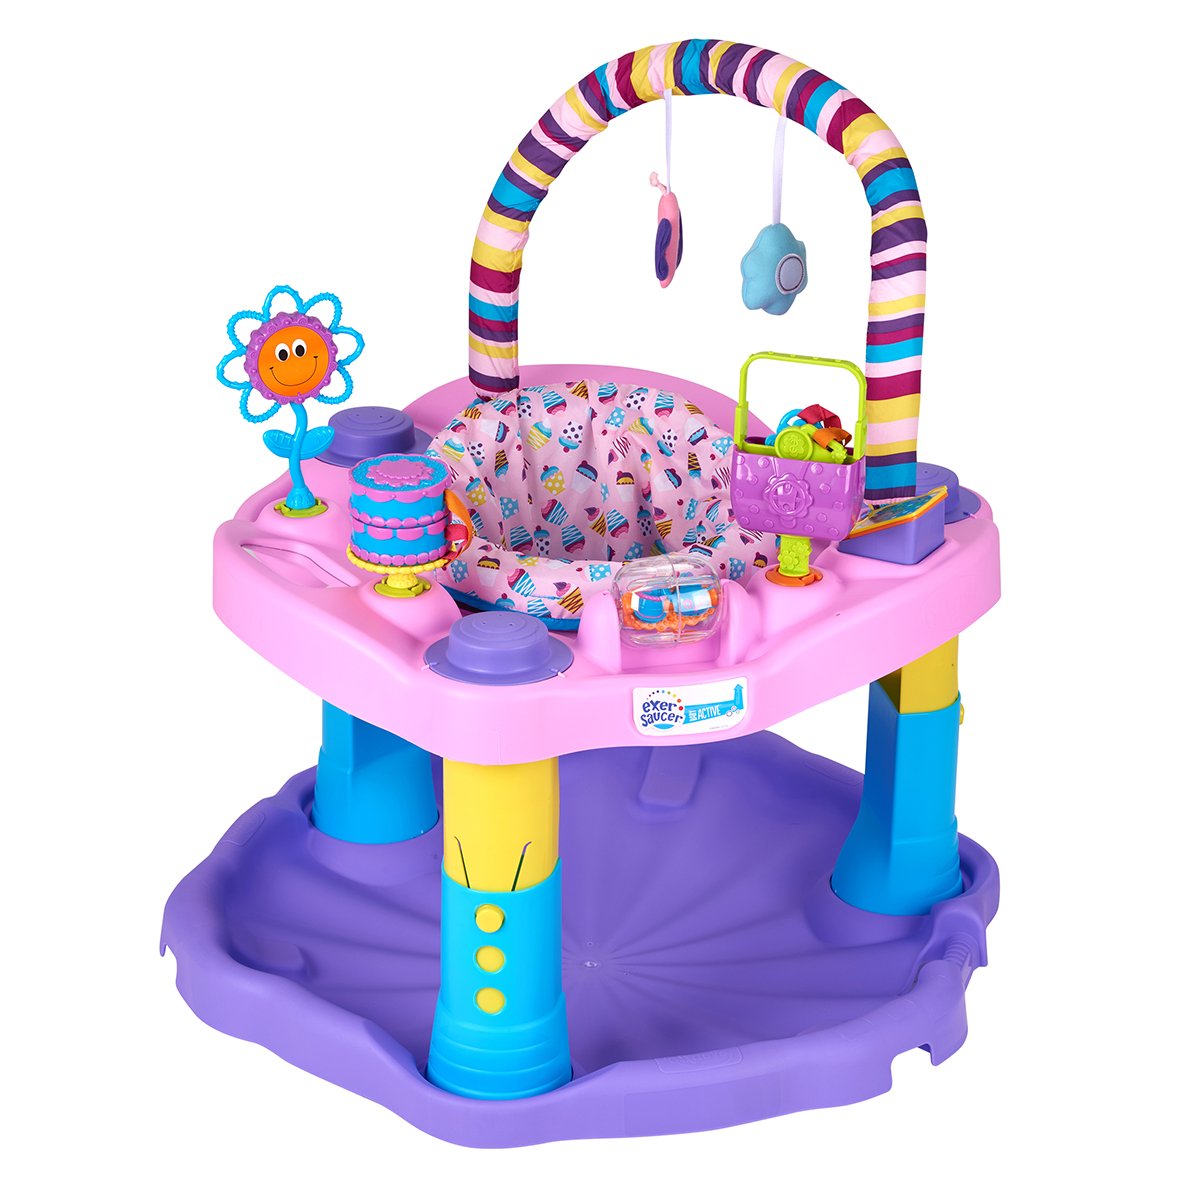 summer infant portable exersaucer